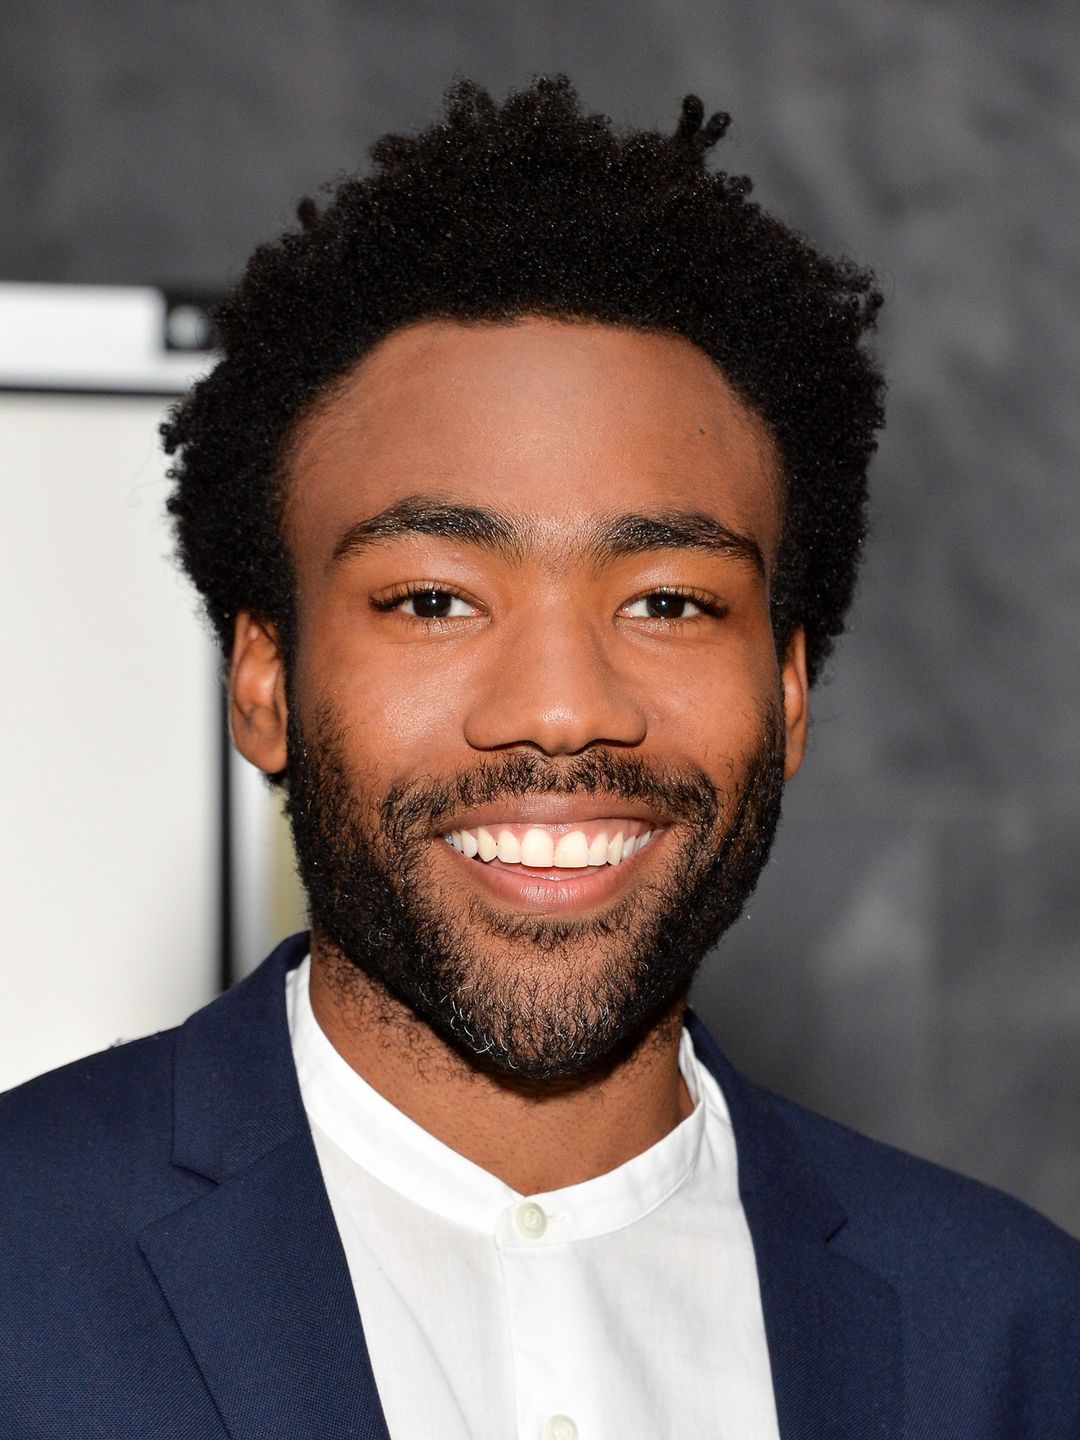 Donald Glover how old is he